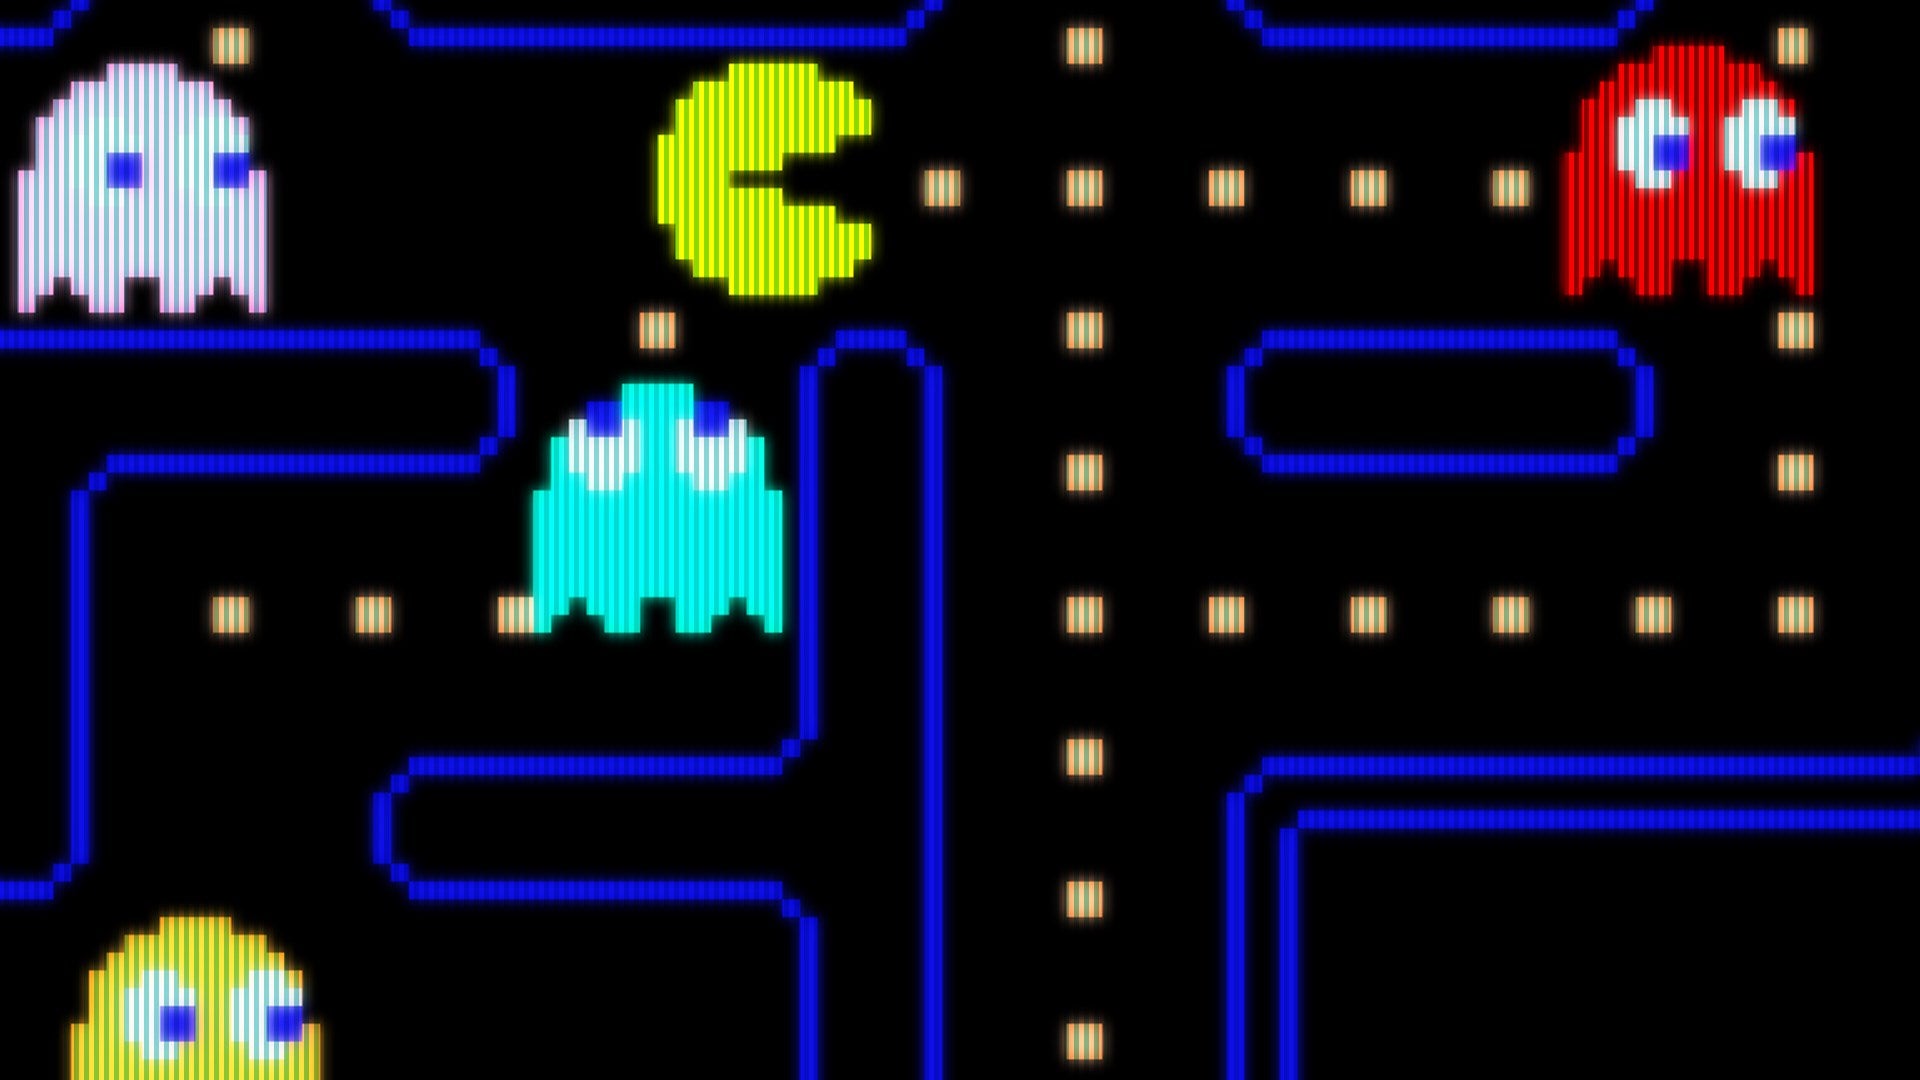 Image for 40 years after its original release, a playable version of Pac-Man has been recreated by Artificial Intelligence